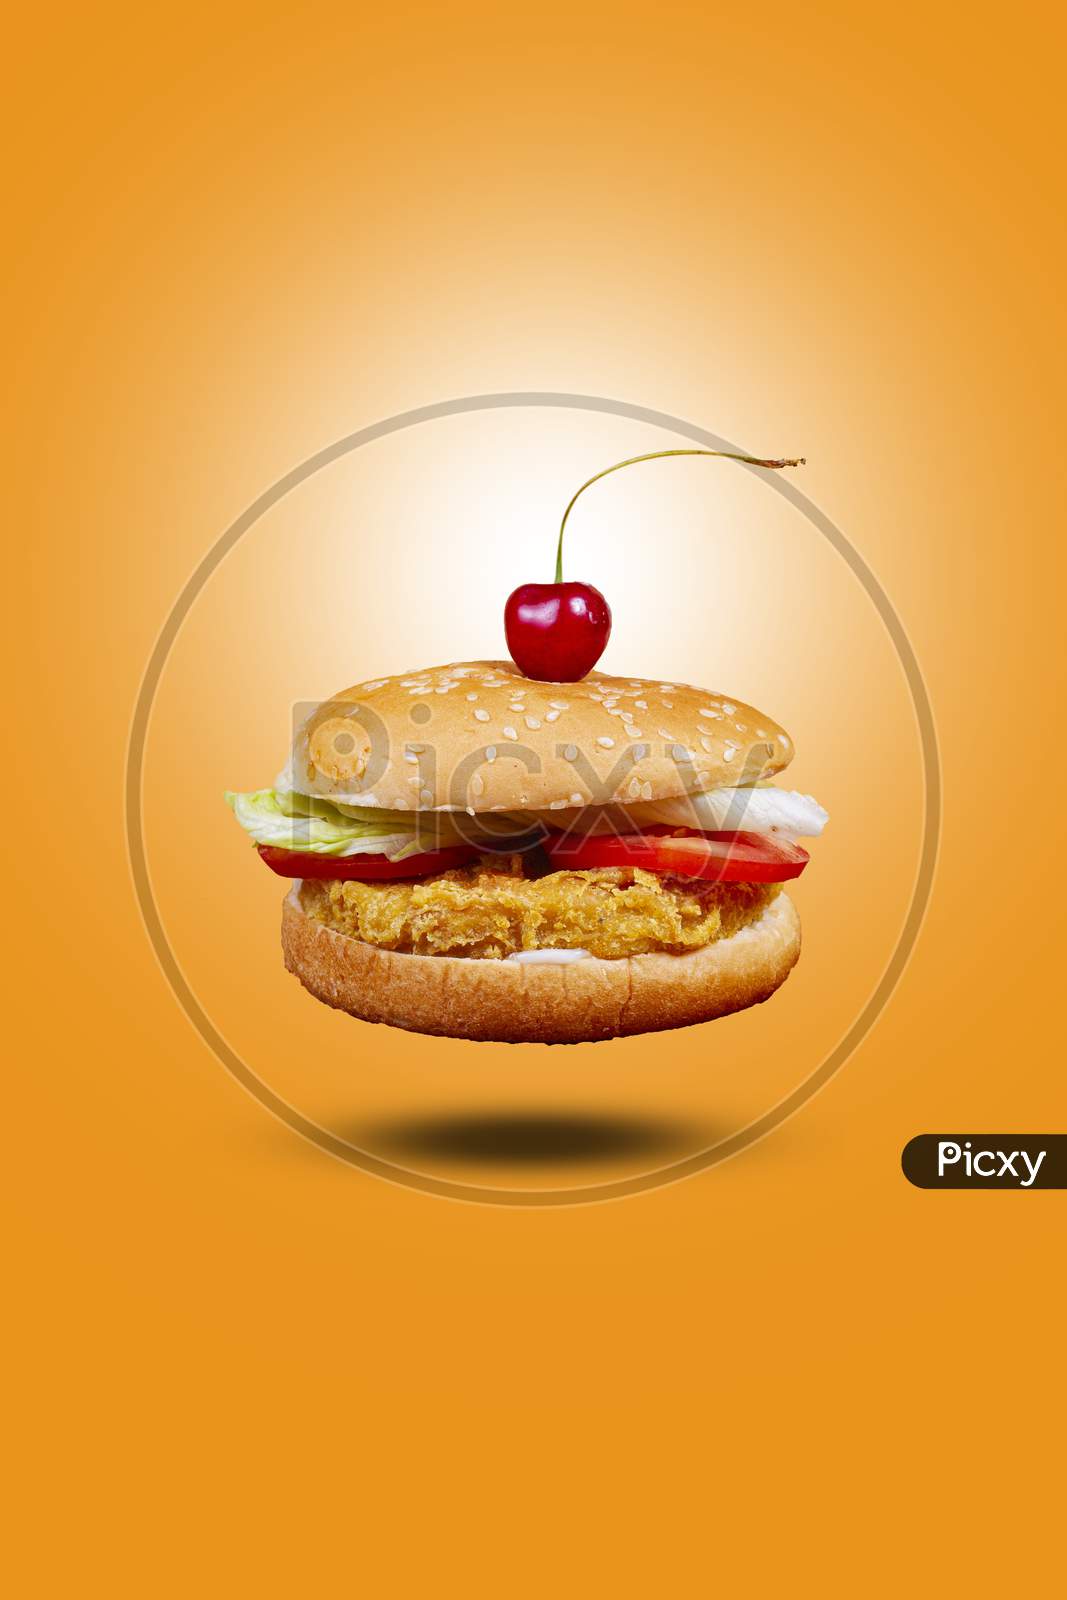 Juicy Chicken Burger Flying , Hamburger Or Cheeseburger With One Chicken Patties. Concept Of American Fast Food. Copy Space